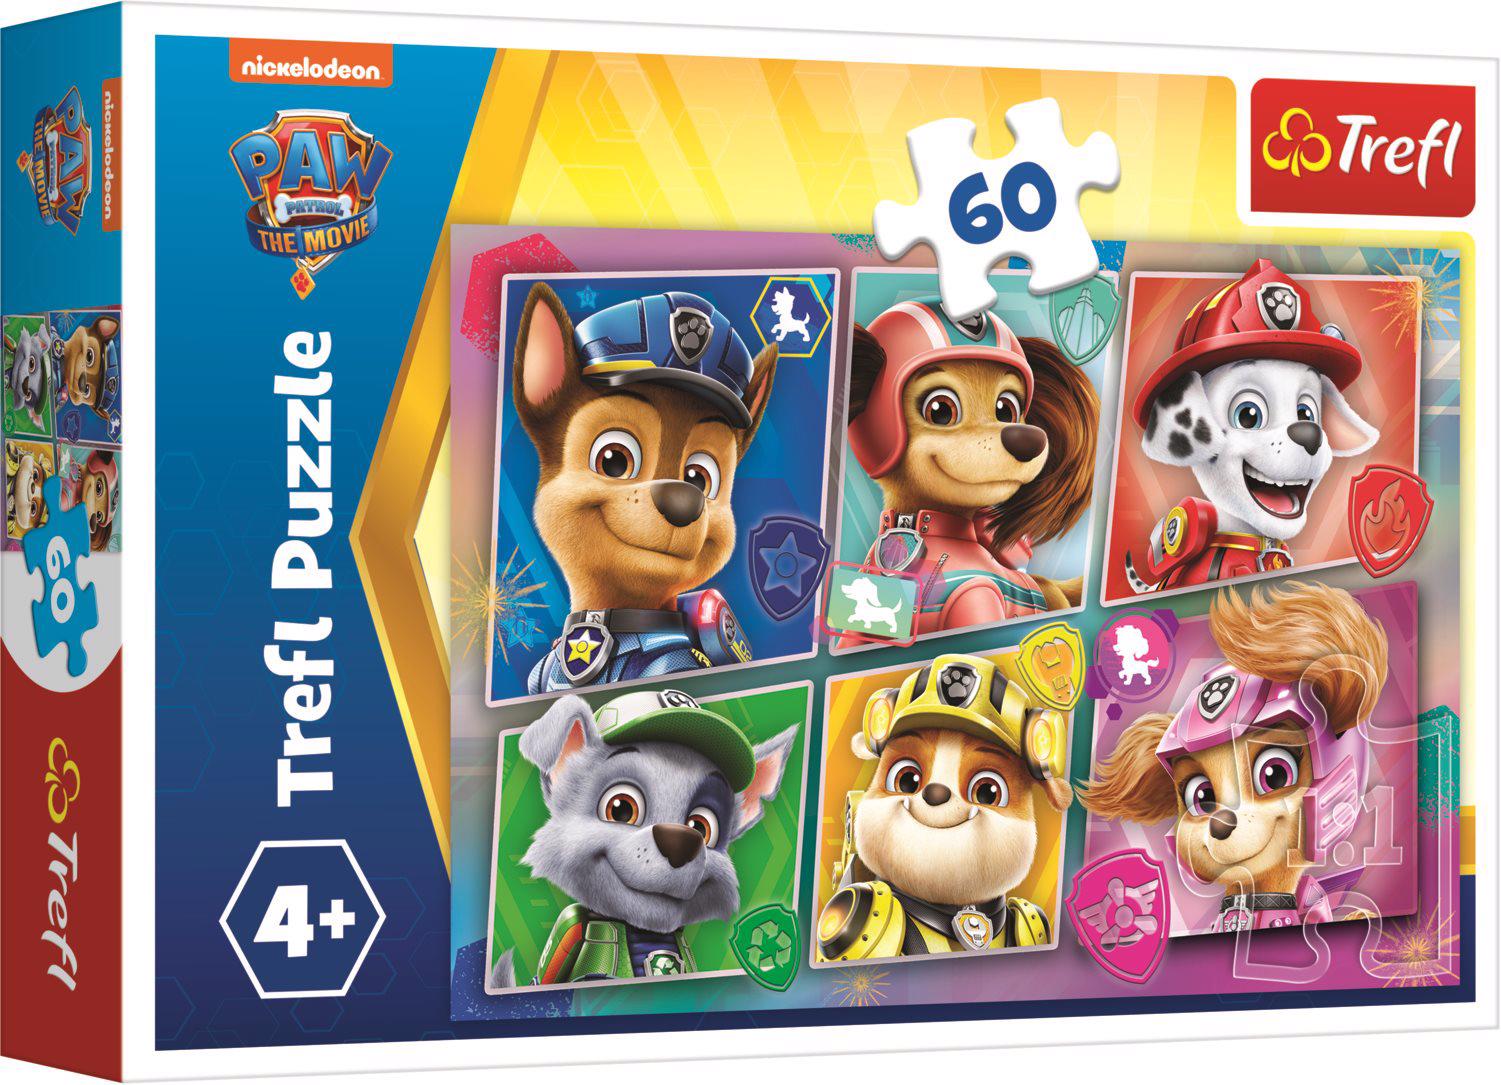 Paw Patrol The Movie: Fiends Ready for an Action 60